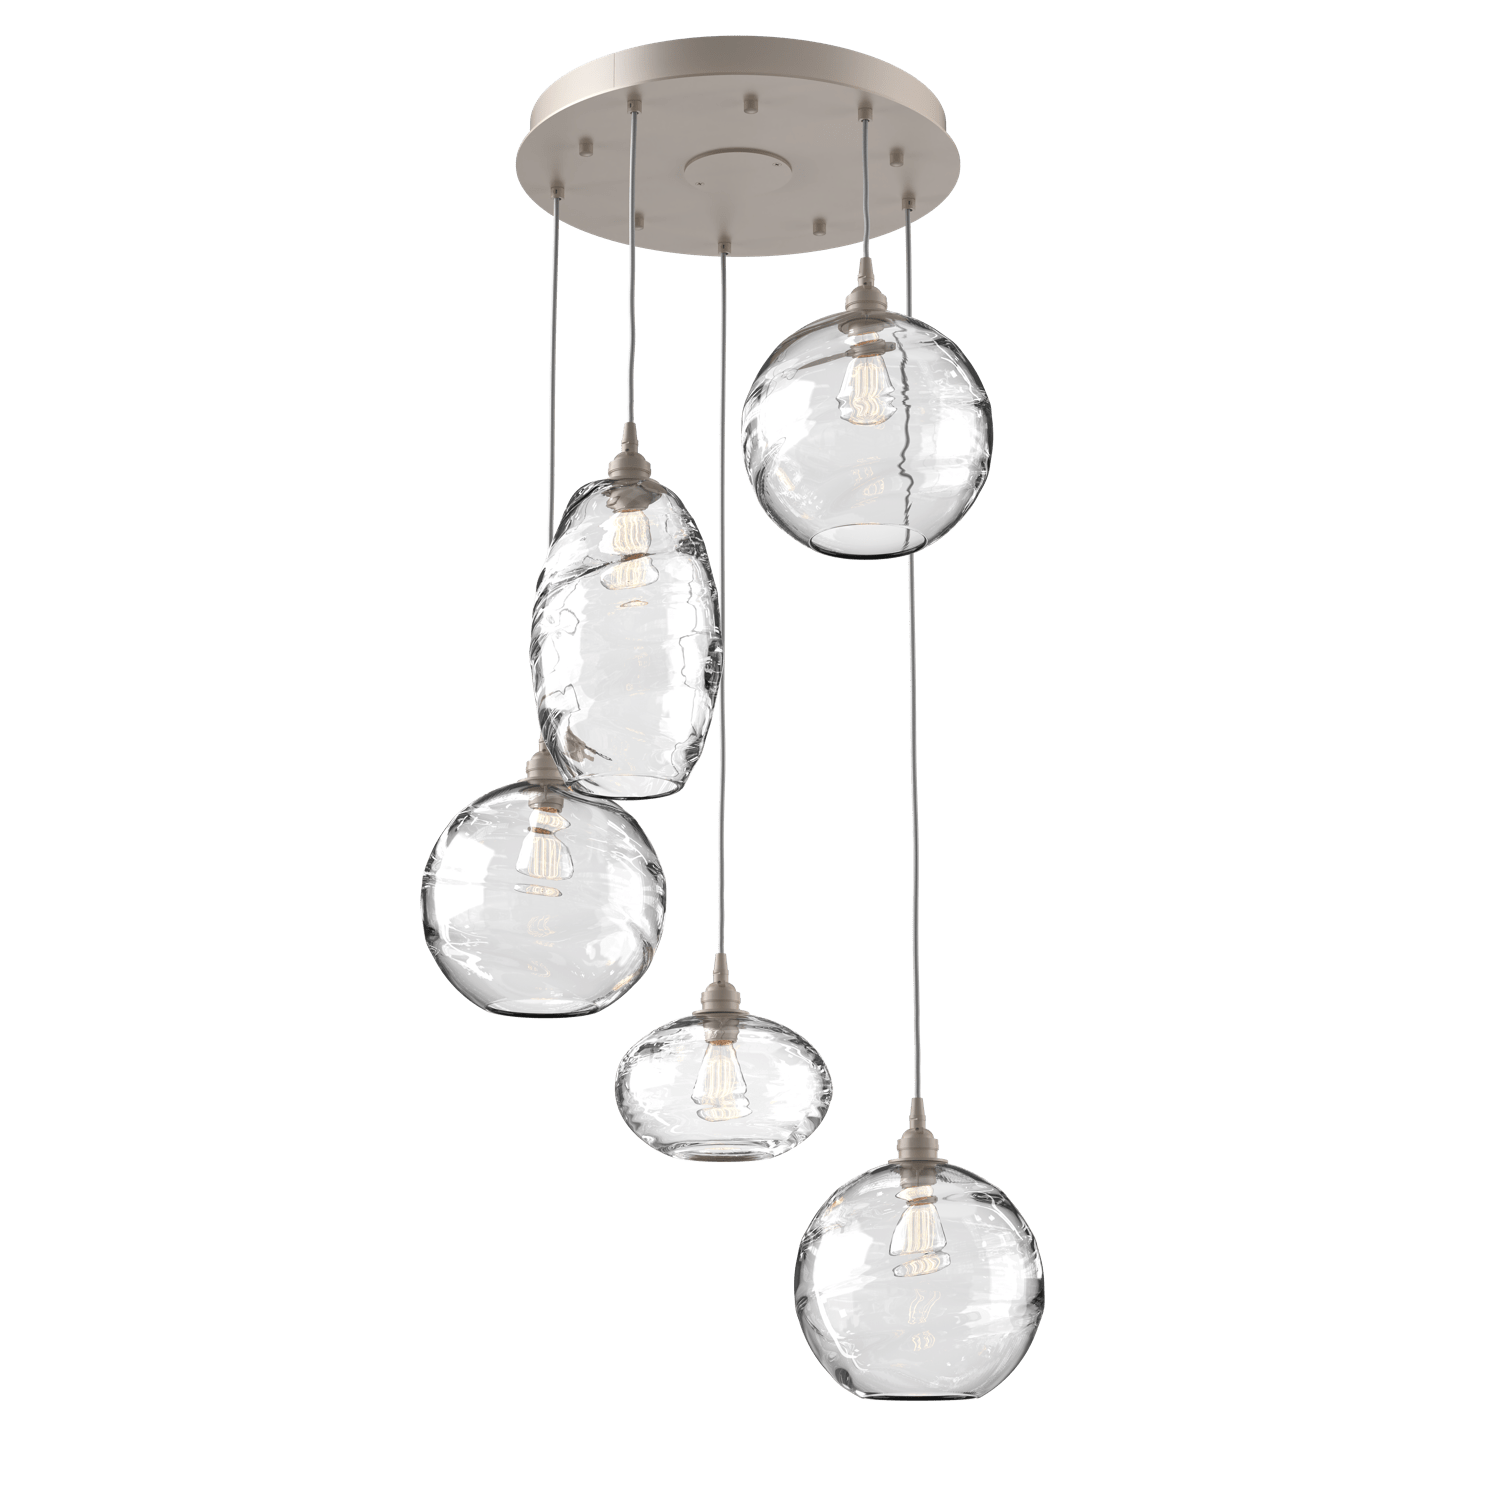 CHB0048-05-BS-OC-Hammerton-Studio-Optic-Blown-Glass-Misto-5-light-round-pendant-chandelier-with-metallic-beige-silver-finish-and-optic-clear-blown-glass-shades-and-incandescent-lamping